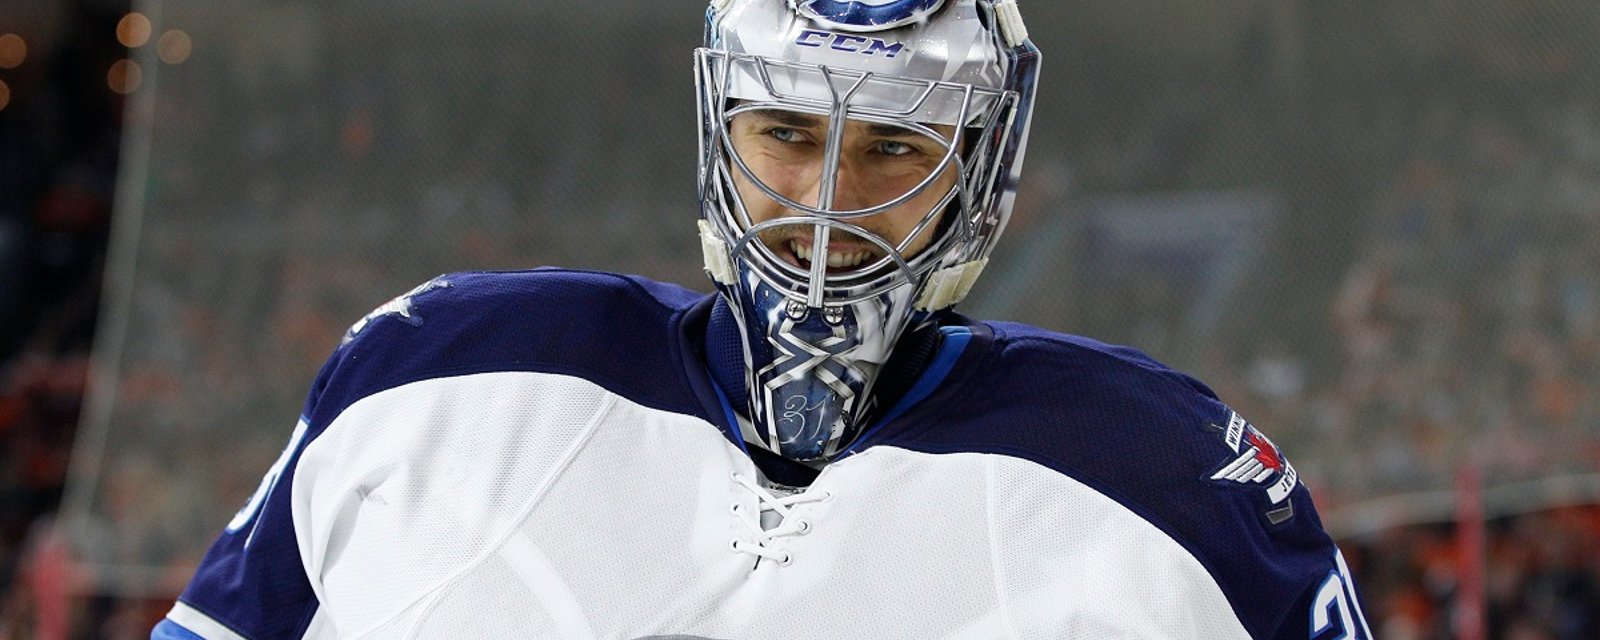 Ondreh Pavelec reportedly negotiating with NHL team on new deal.